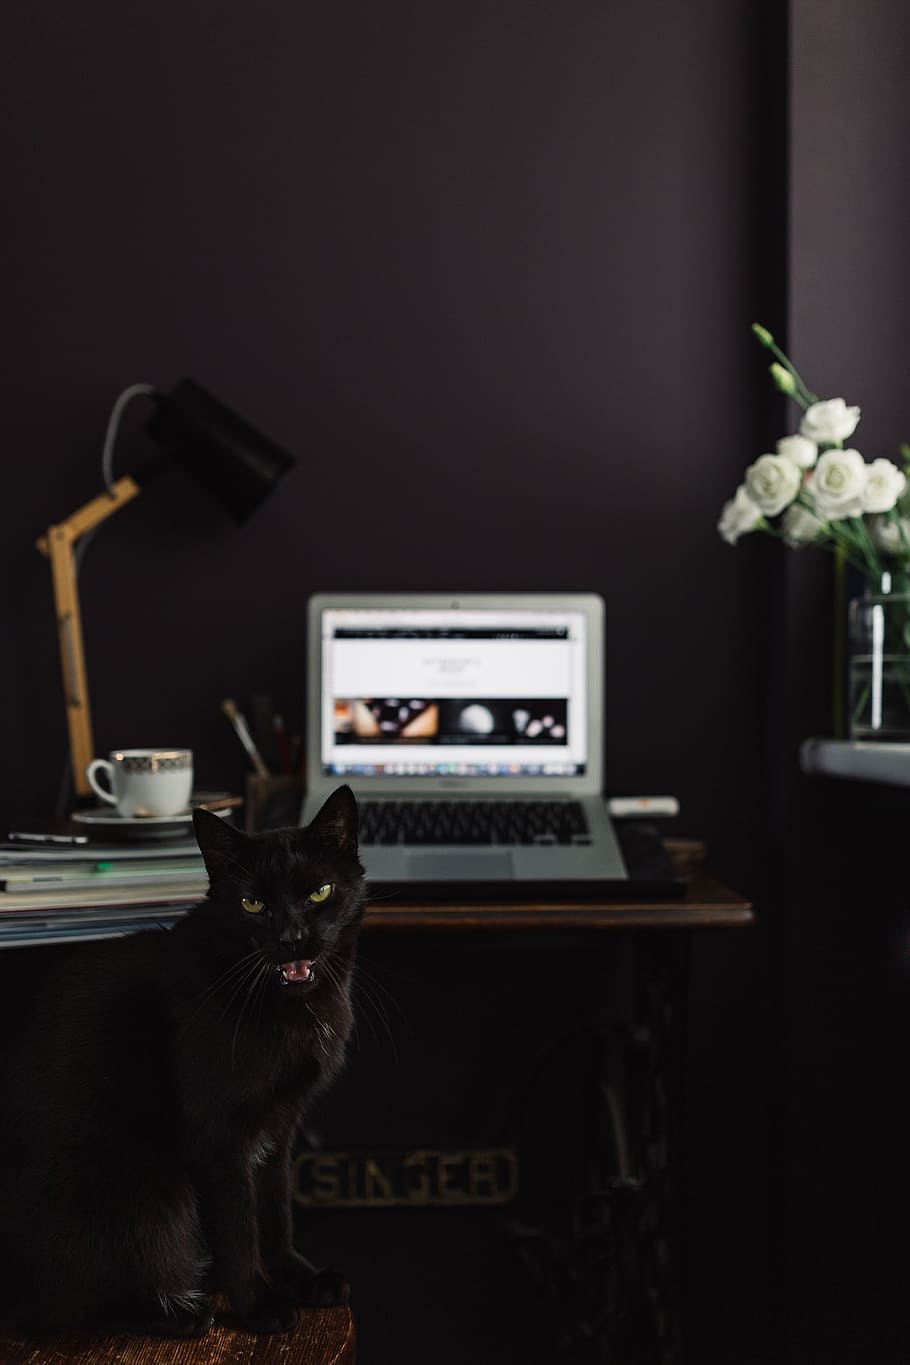 Contemporary home office idea with dark walls, workspace, workplace